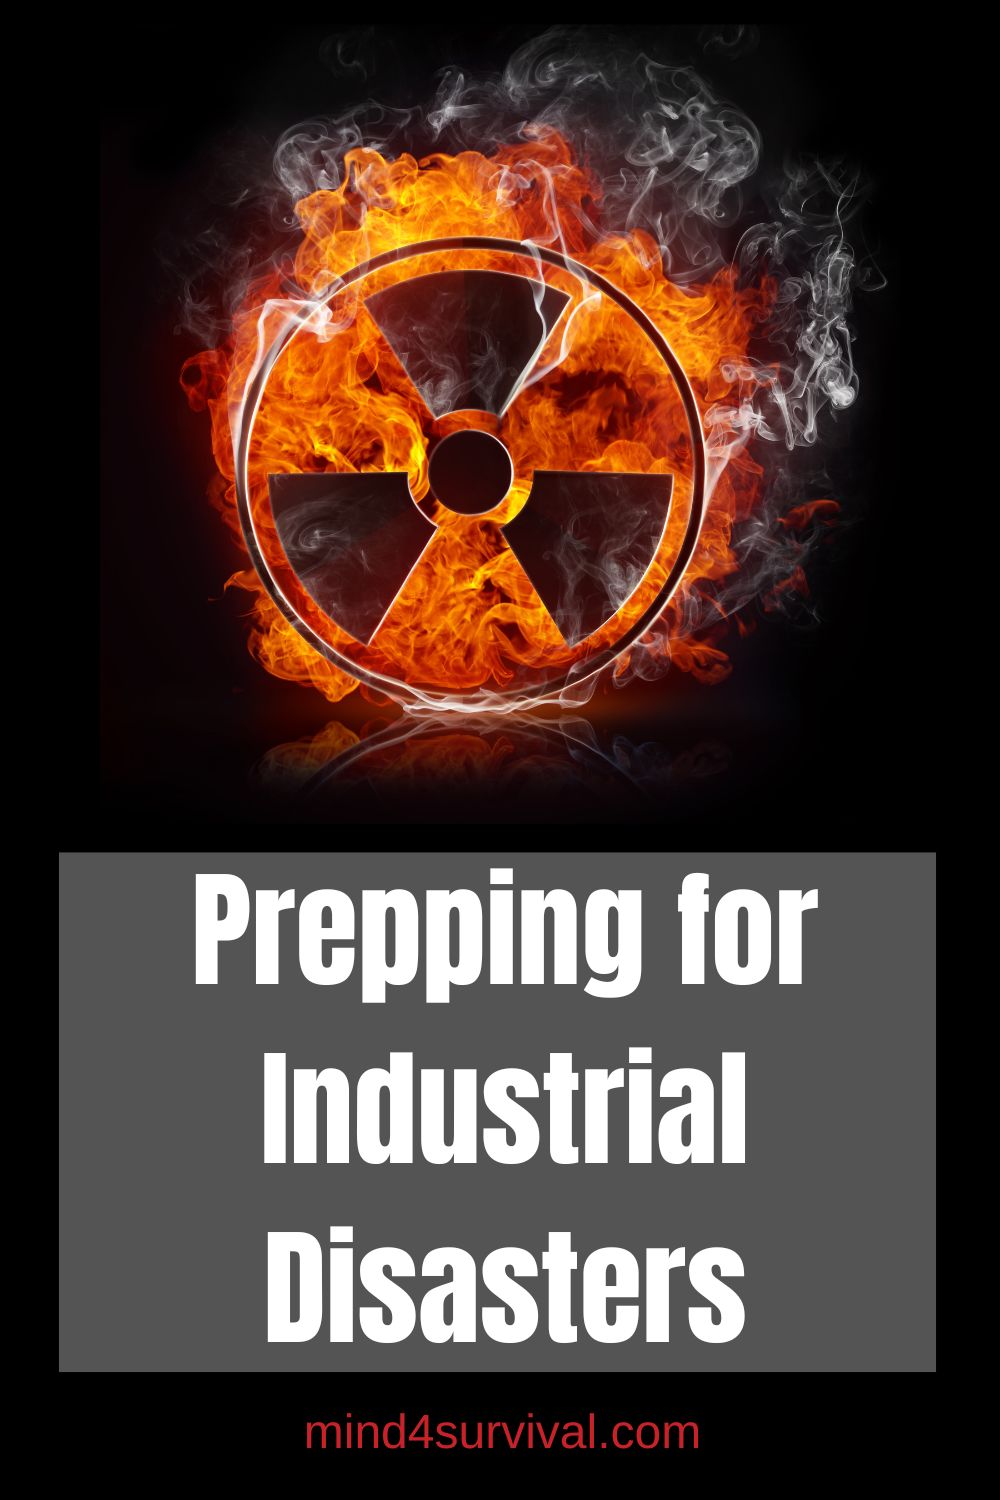 Prepping for Industrial Disasters